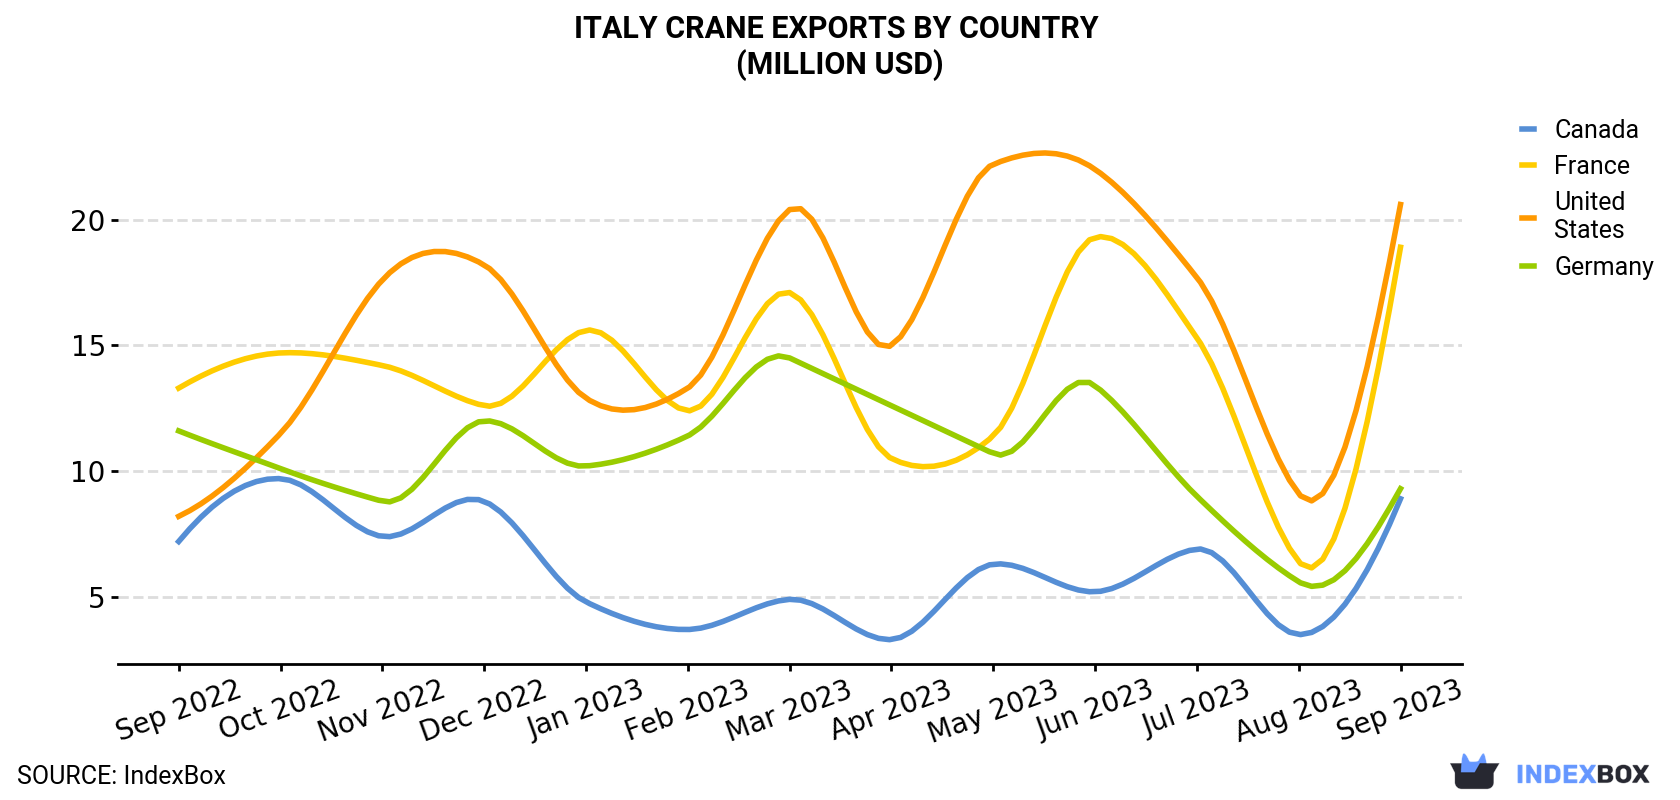 Italy Crane Exports By Country (Million USD)